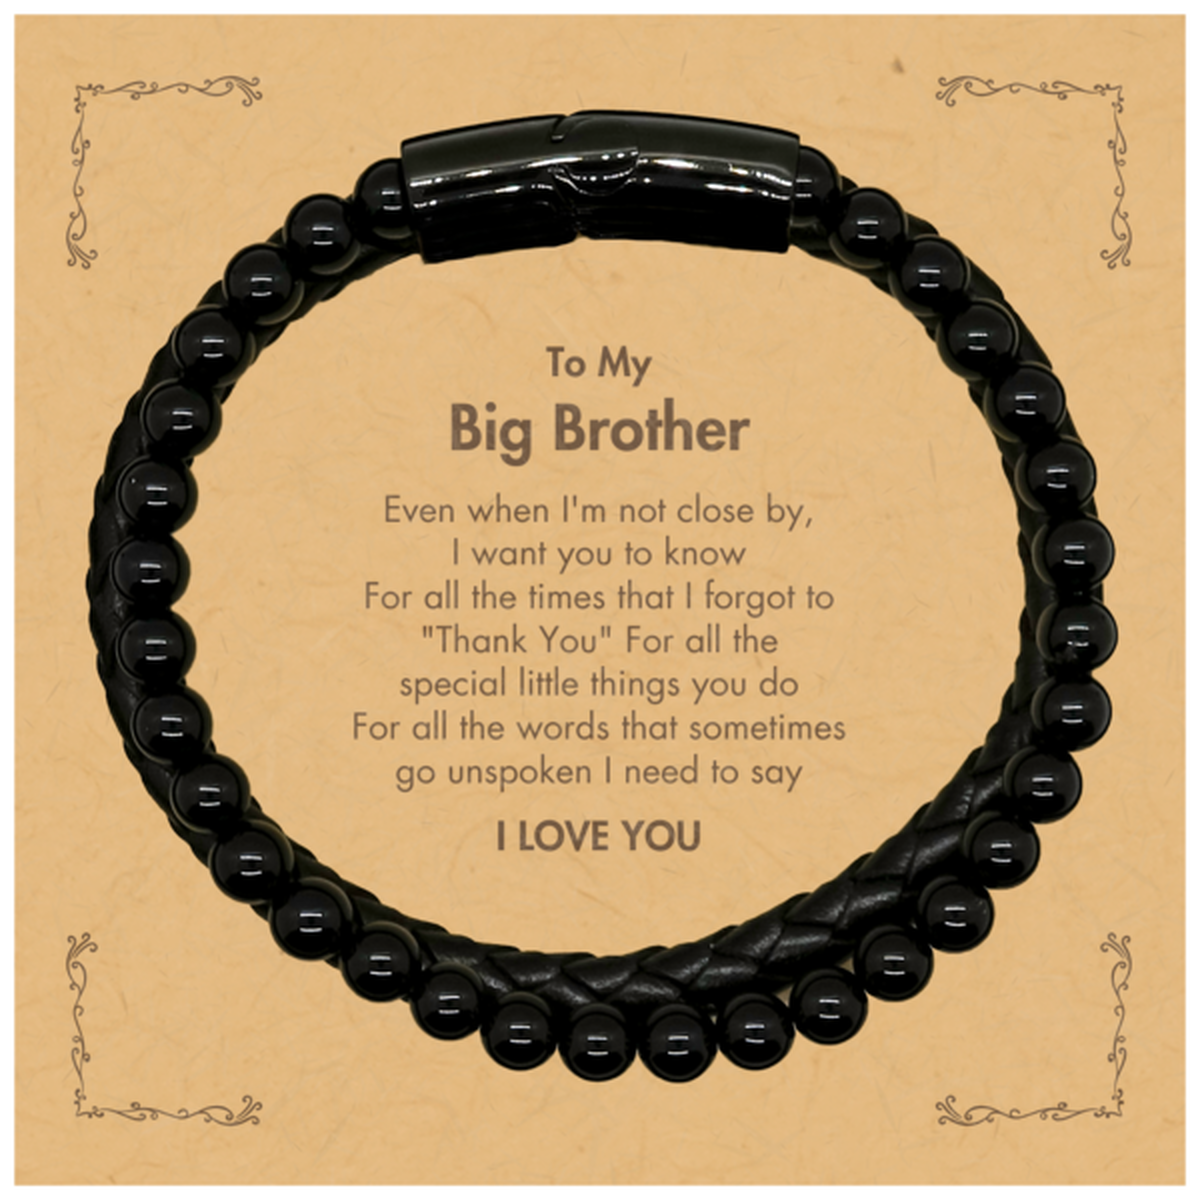 Thank You Gifts for Big Brother, Keepsake Stone Leather Bracelets Gifts for Big Brother Birthday Mother's day Father's Day Big Brother For all the words That sometimes go unspoken I need to say I LOVE YOU